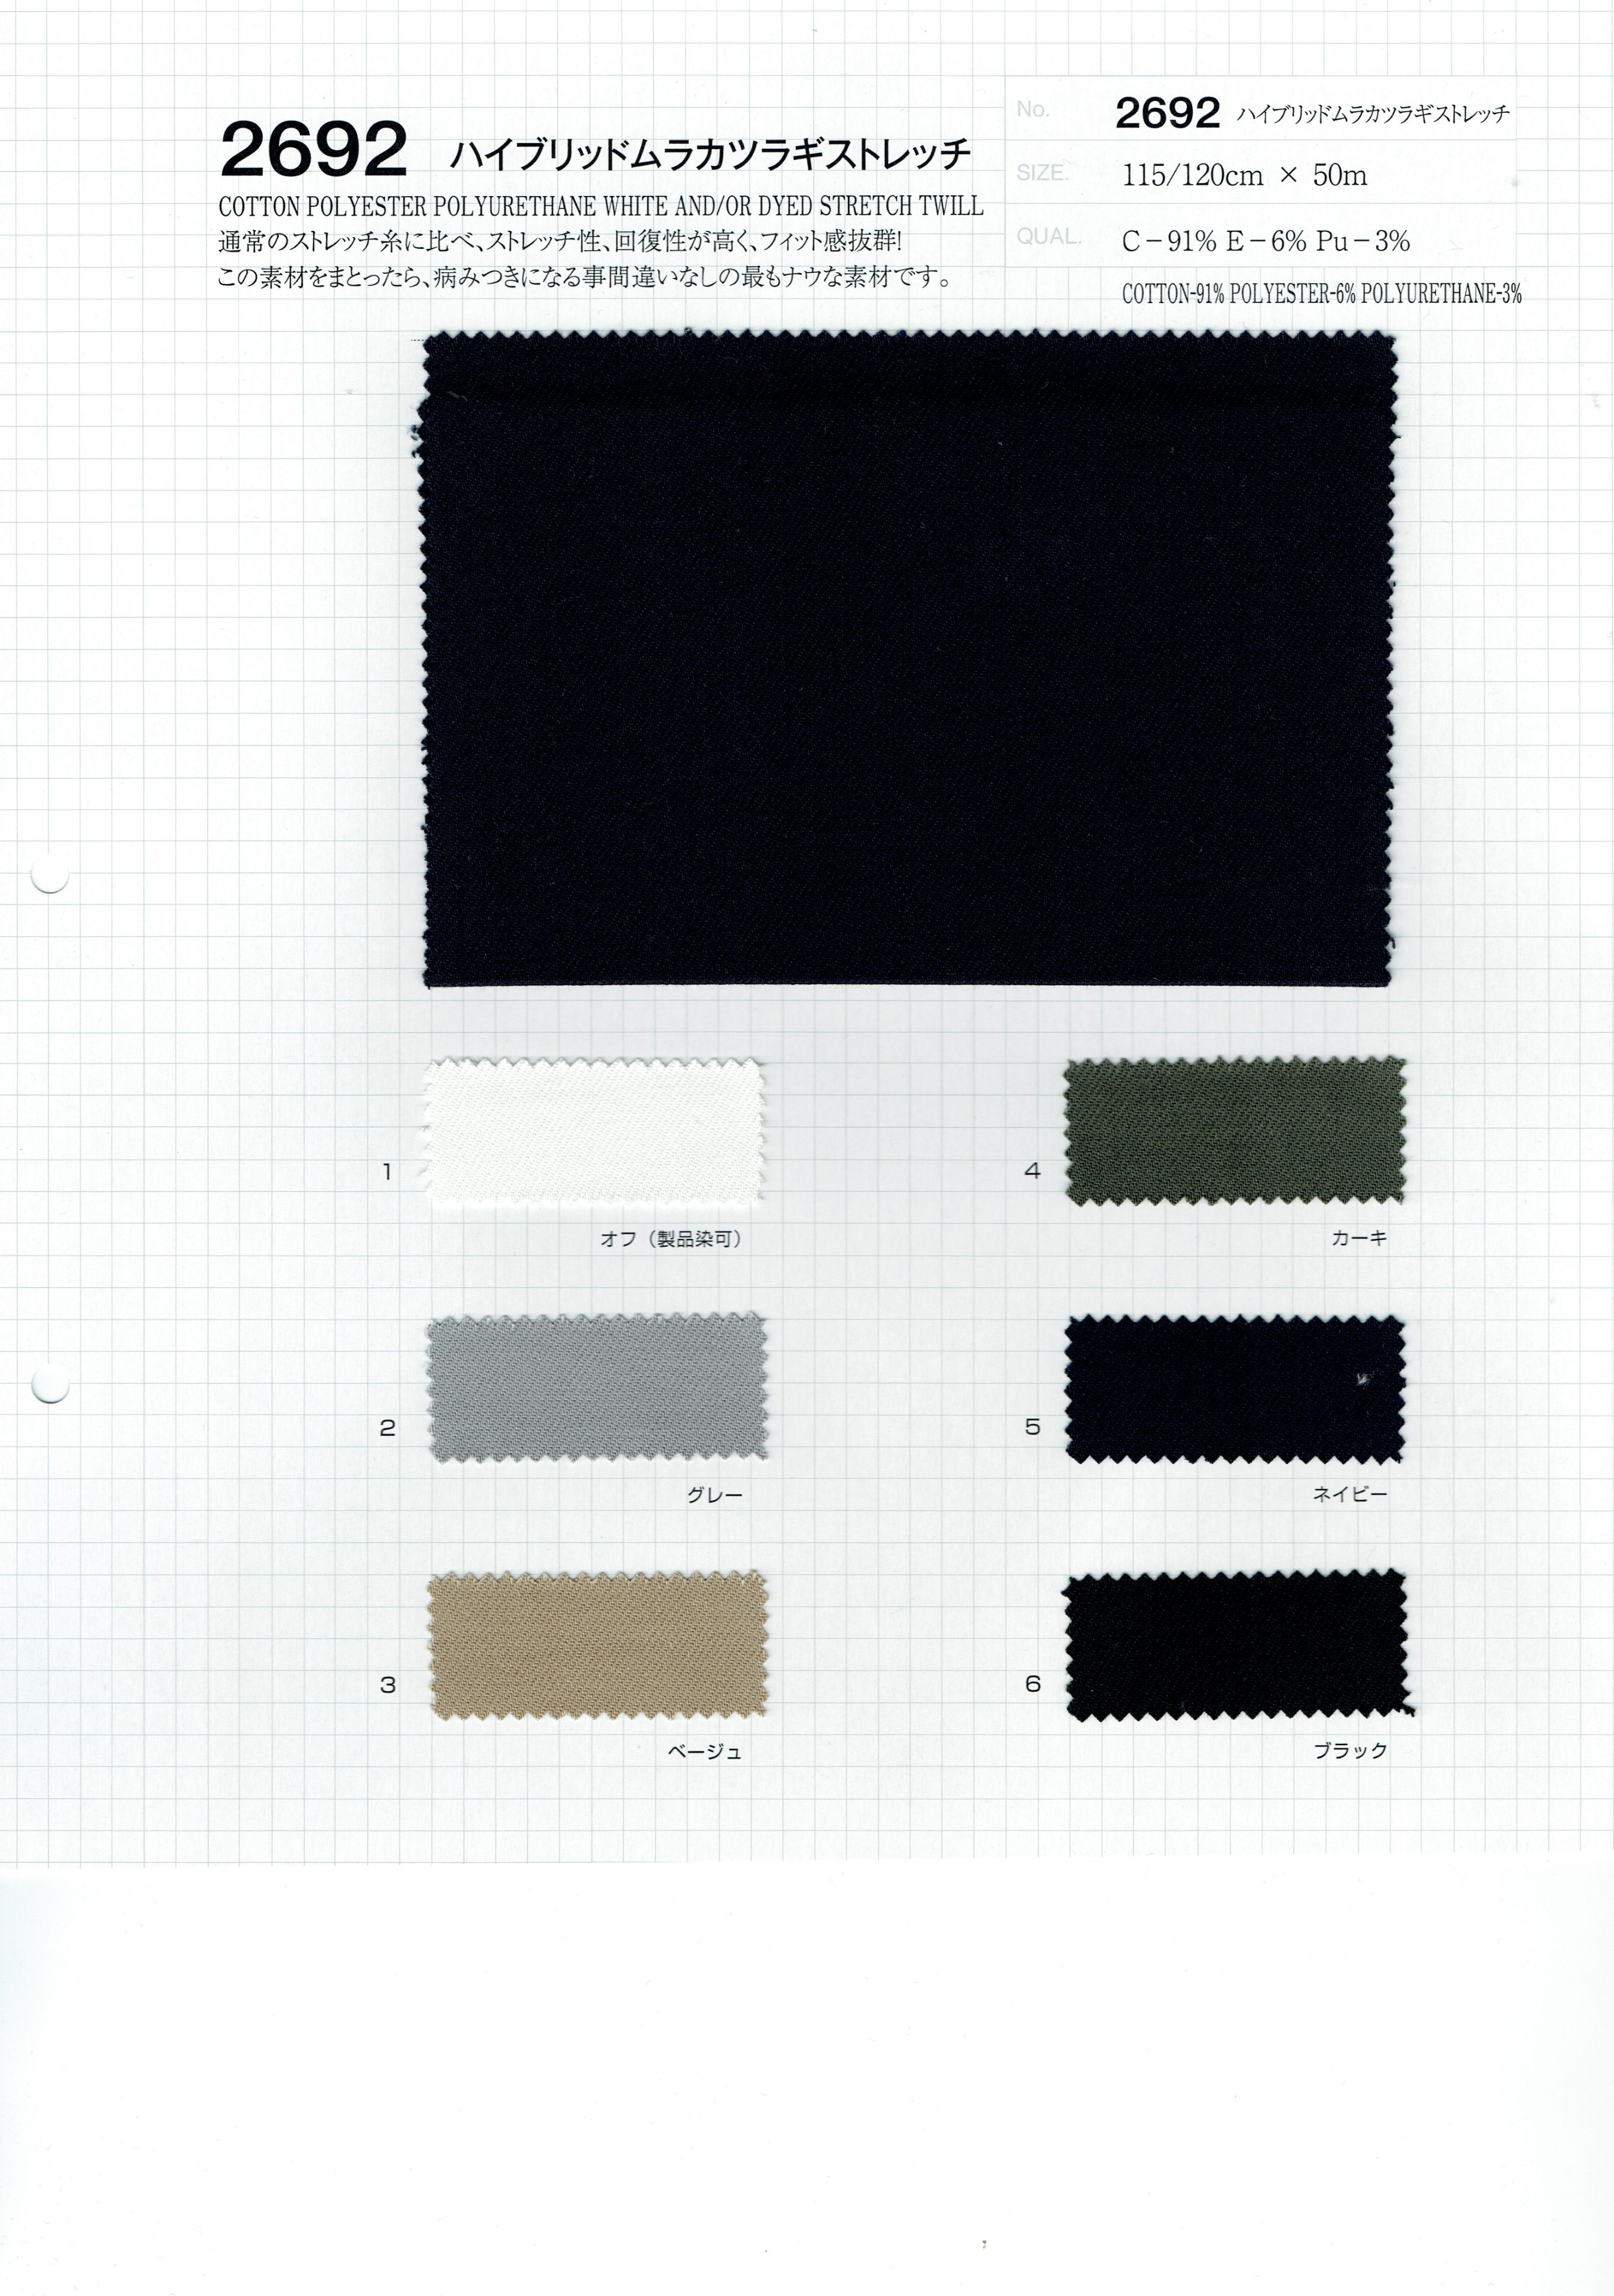 View 91% COTTON 6% POLYESTER 3% POLYURETHANE WHITE AND/OR DYED STRETCH TWILL